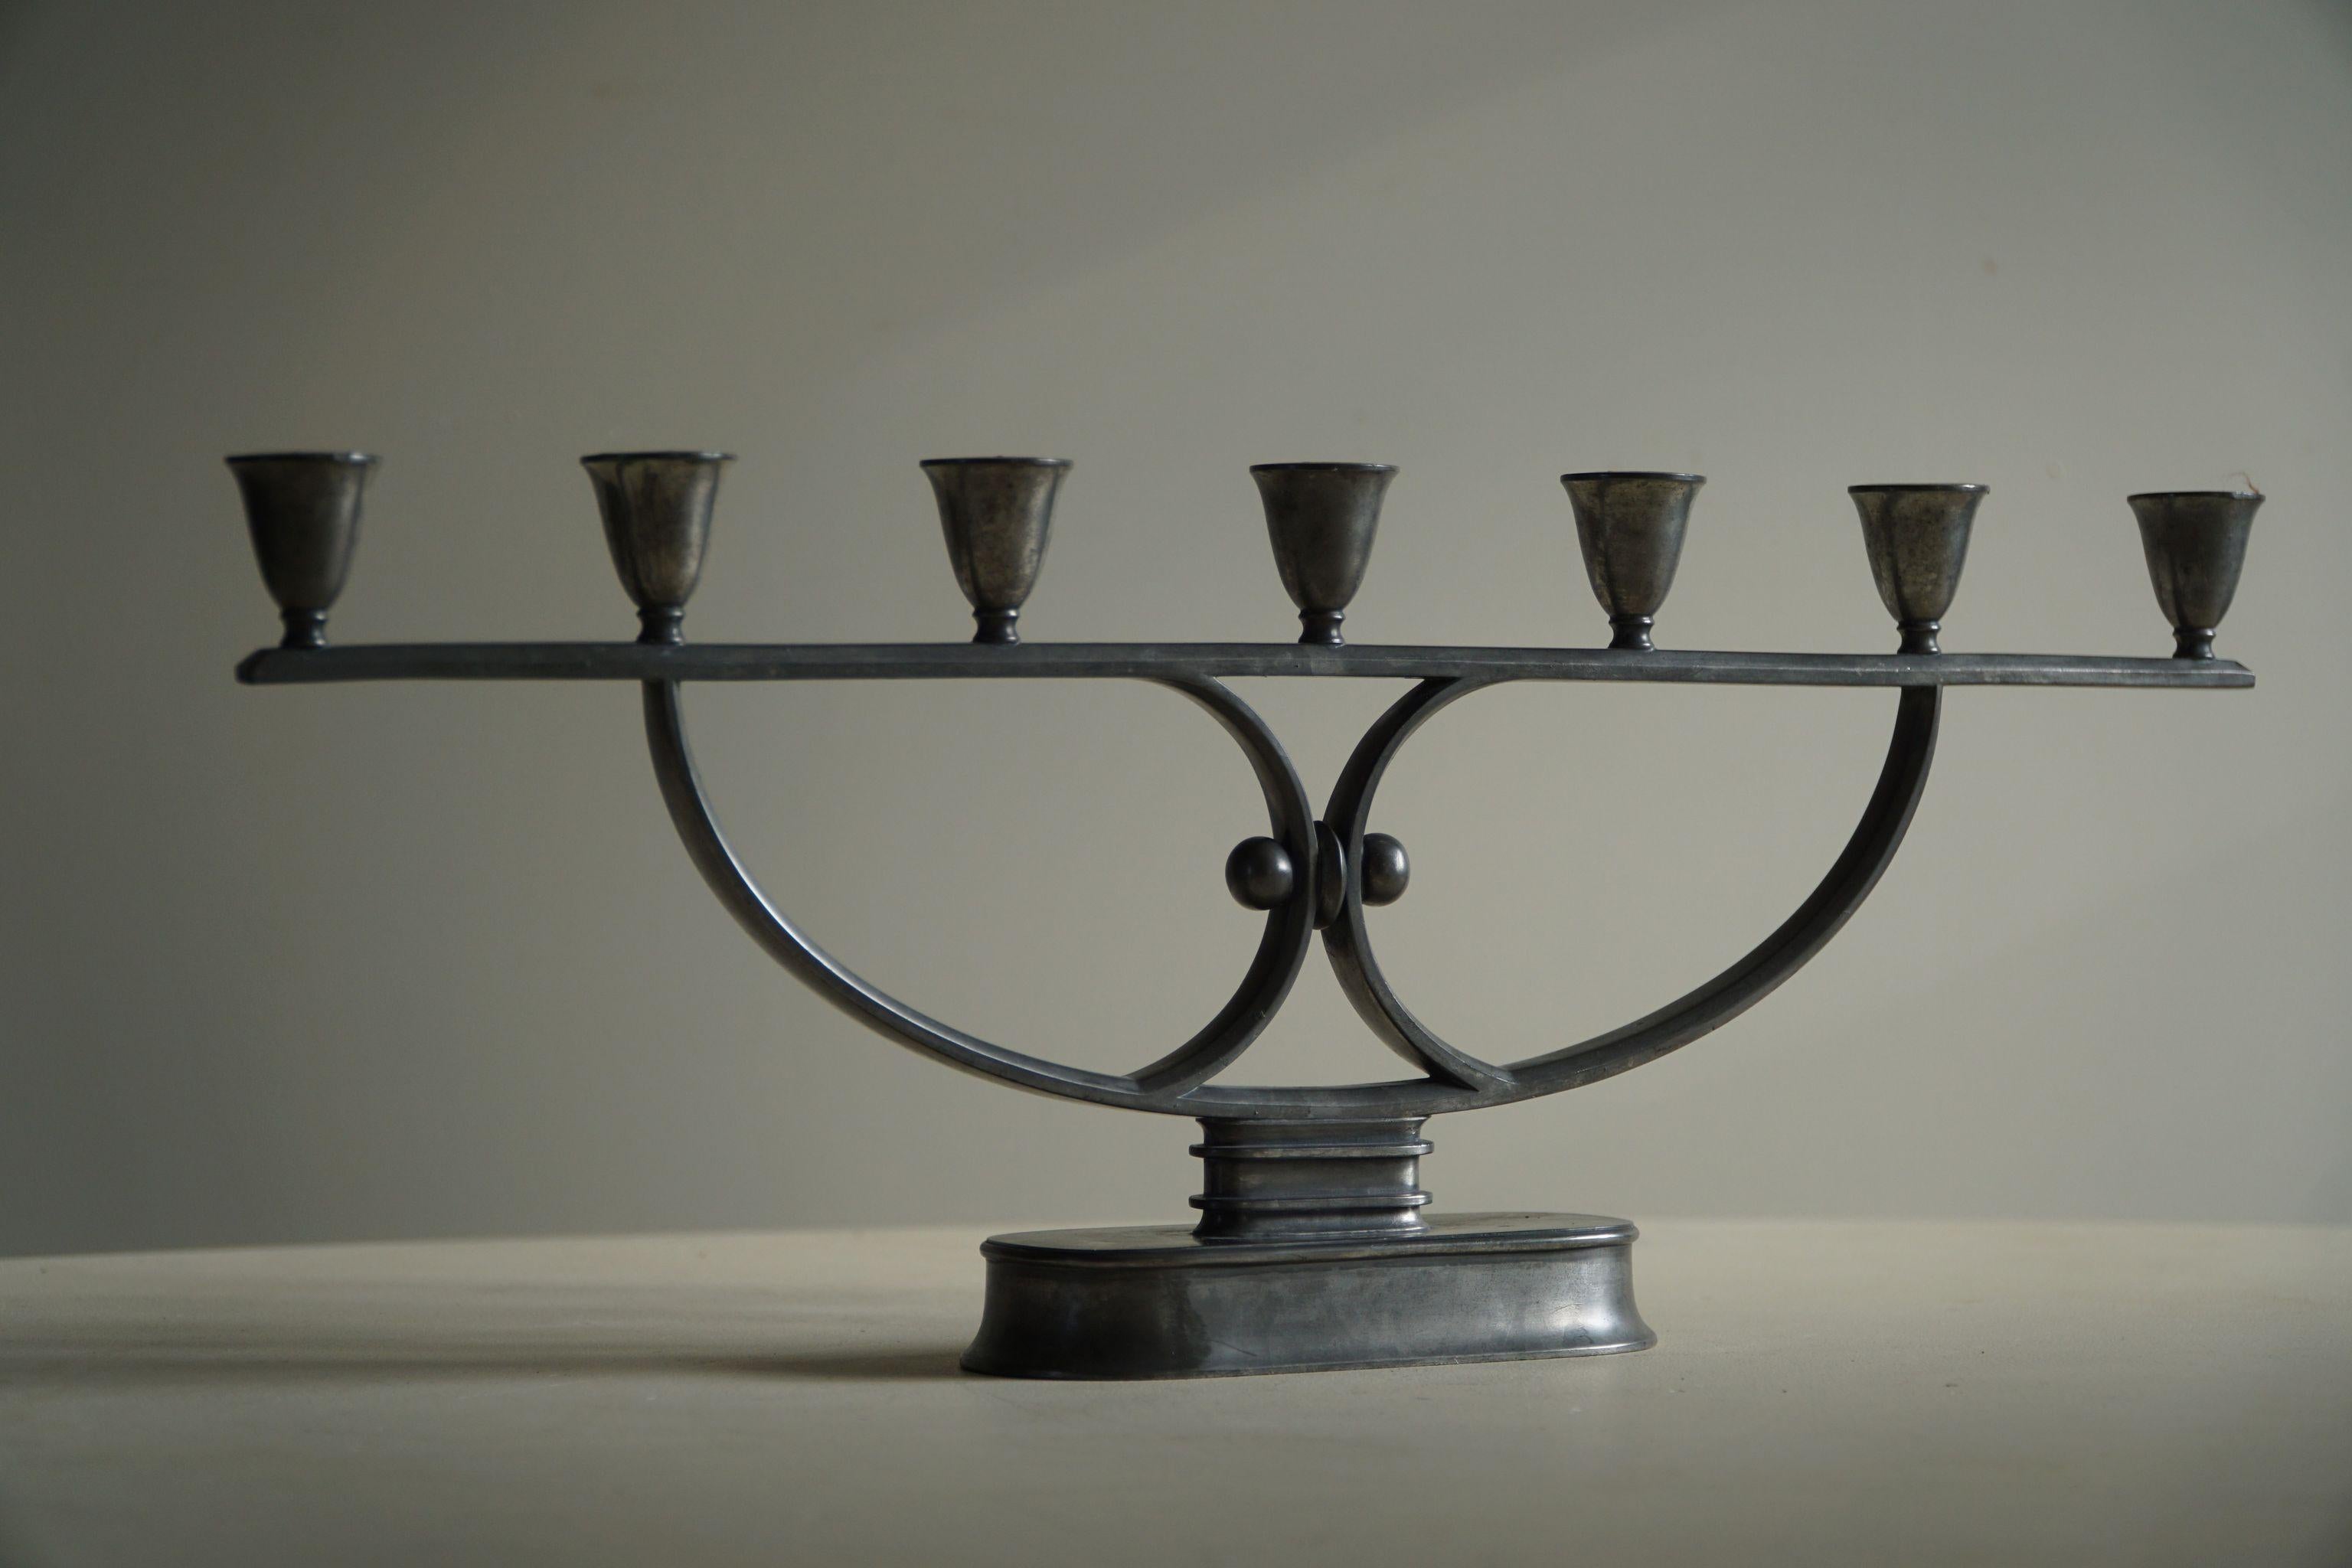 Just Andersen, A Large Metal Candlestick, Danish Art Deco, 1920s For Sale 4